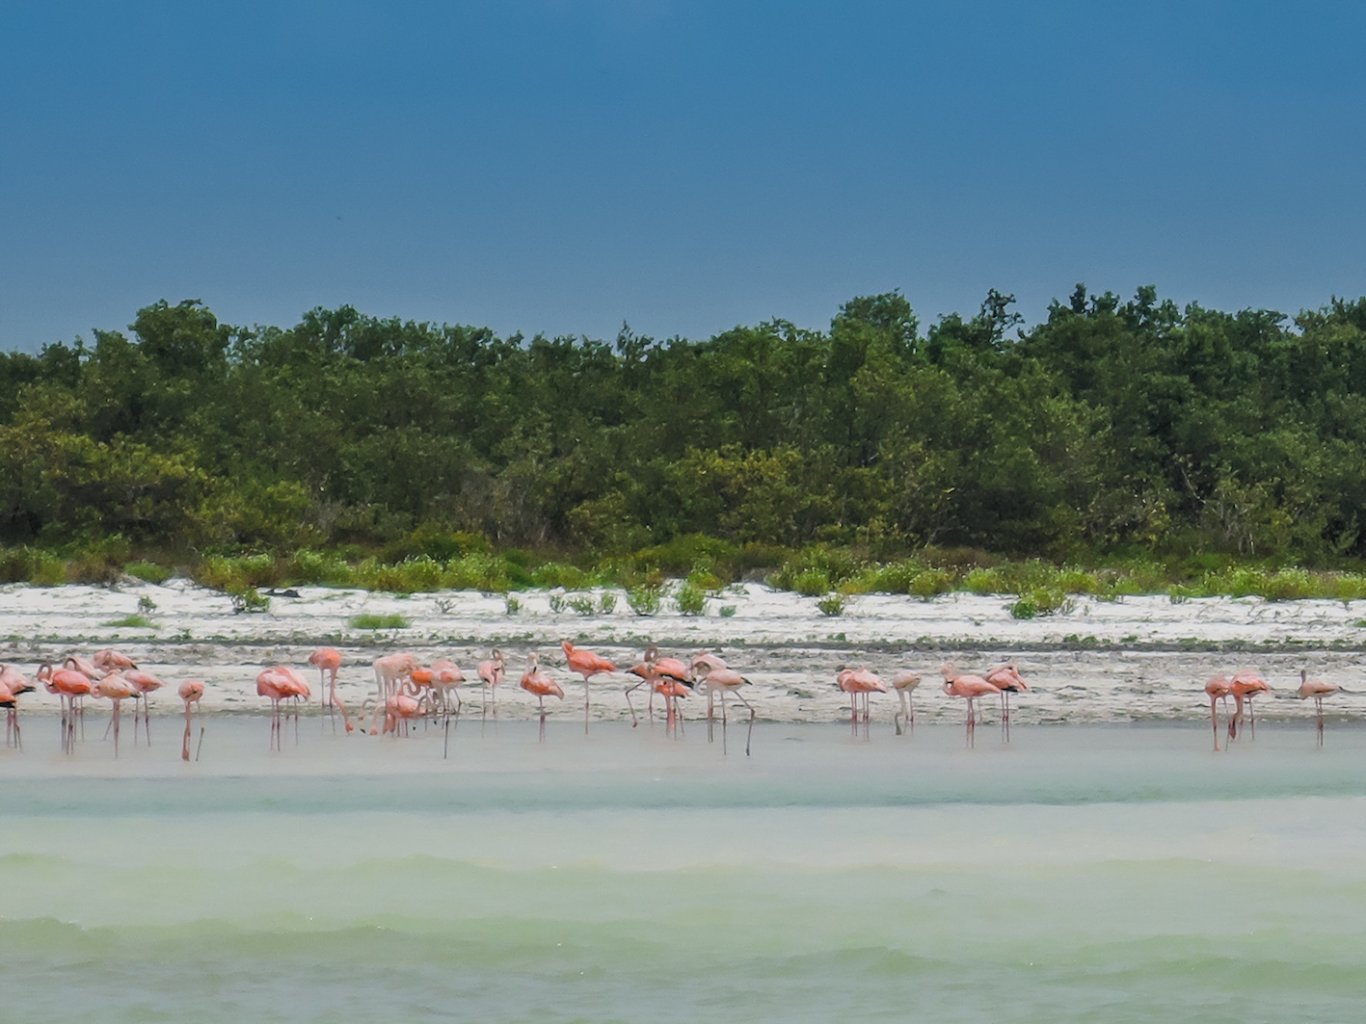 A scenic view of the pink flamingoes at the beach showing the ocean, white sand and lush greenery in Holbox Island, Mexico